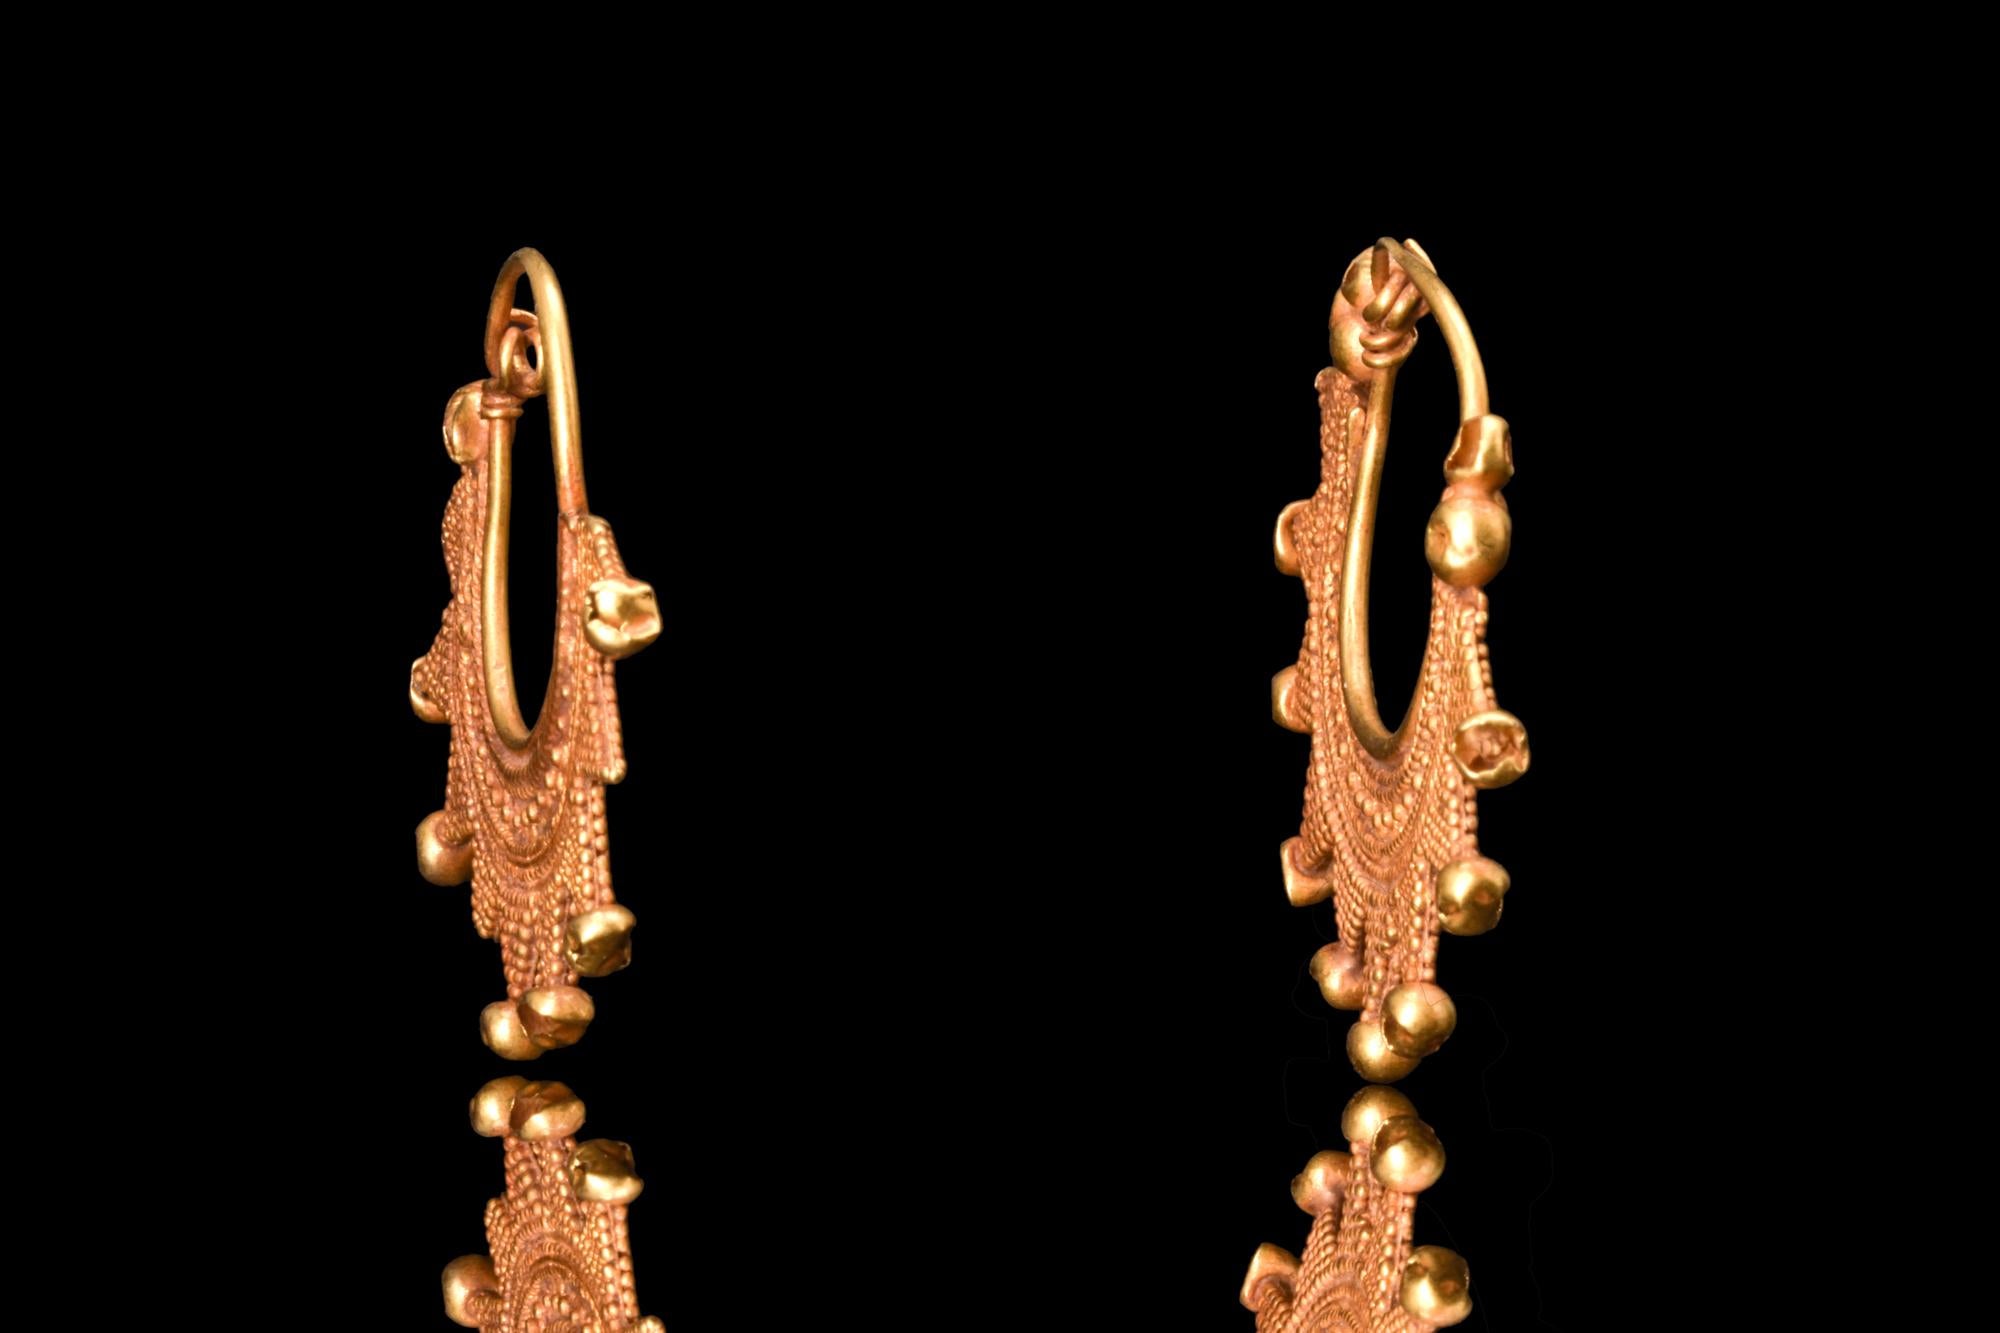 A Hellenistic matching pair of gold earrings that exude beauty and elegance. The delicate filigree work, coupled with the spherical baubles at each point of the radiating design, showcases the intricate craftsmanship of Hellenistic goldsmiths.